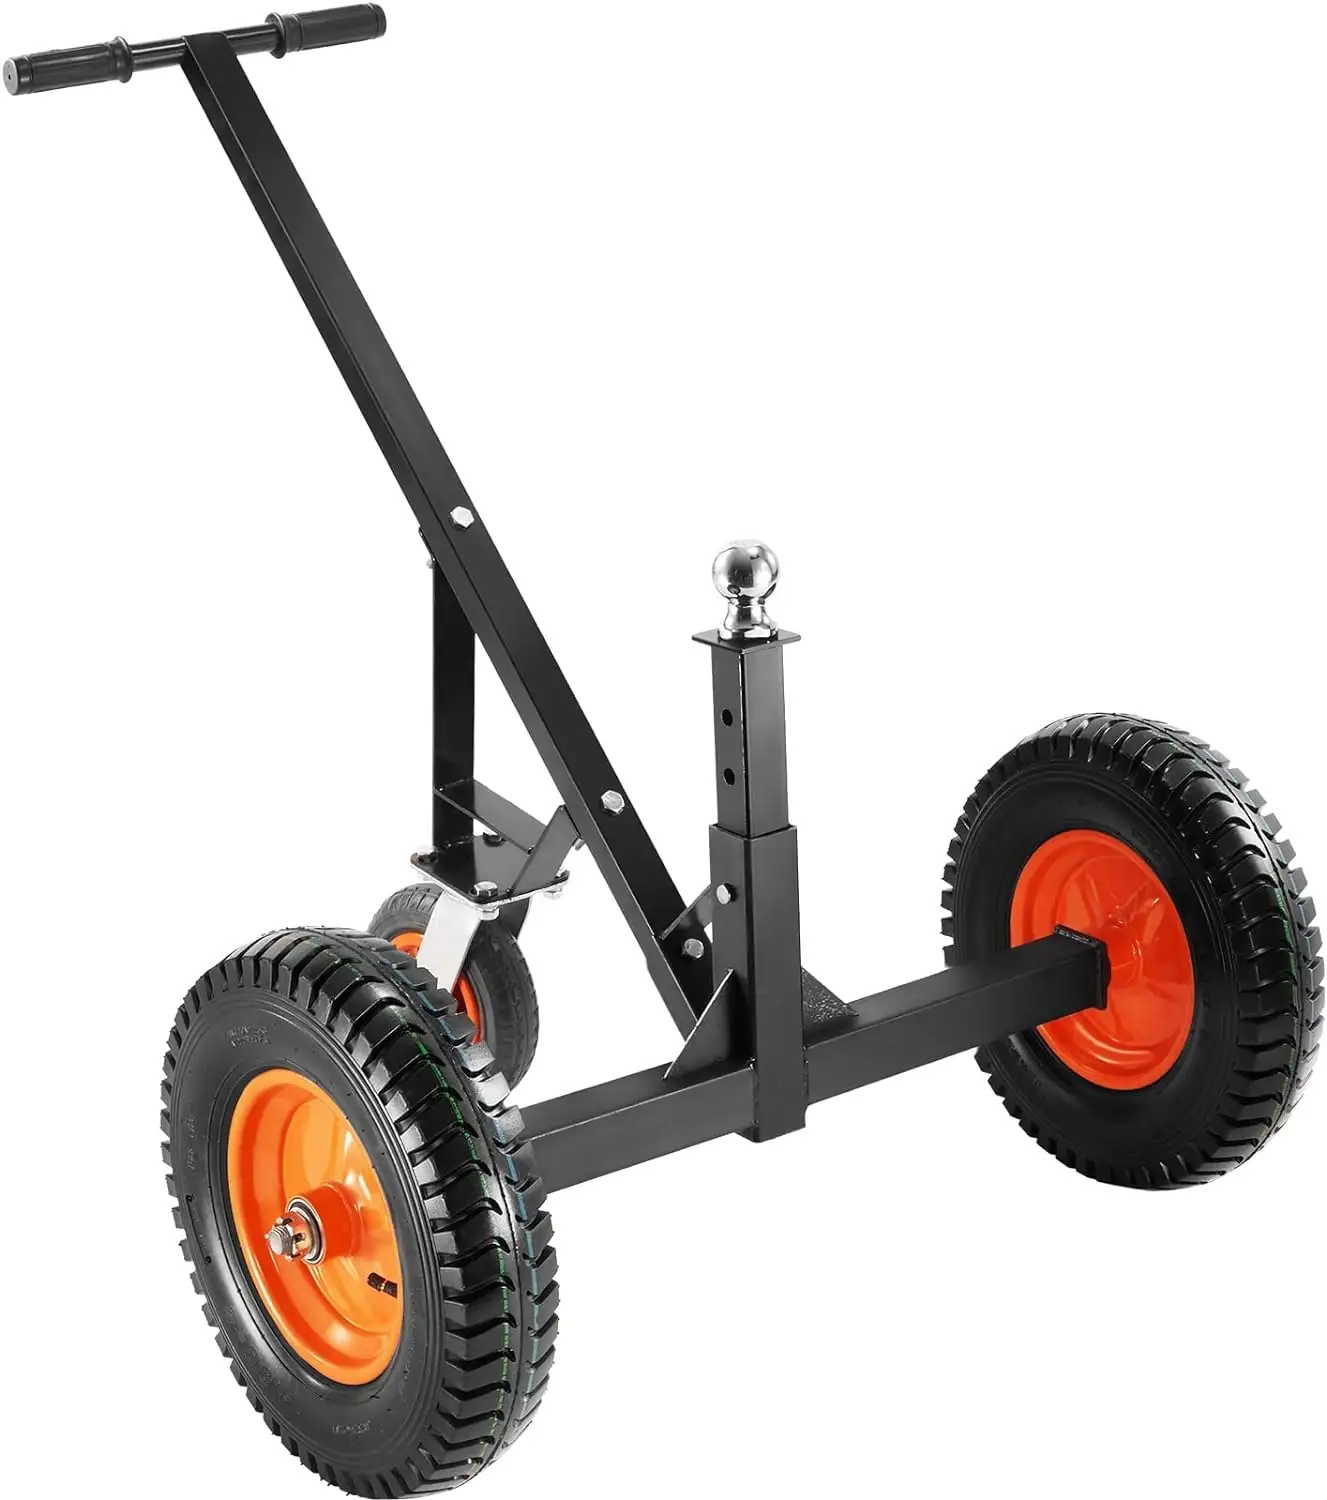 JH-Mech Trailer Dolly Trailer Mover 1000lbs Tongue Weight Capacity Carbon Steel Adjustable Boat Trailer Dolly